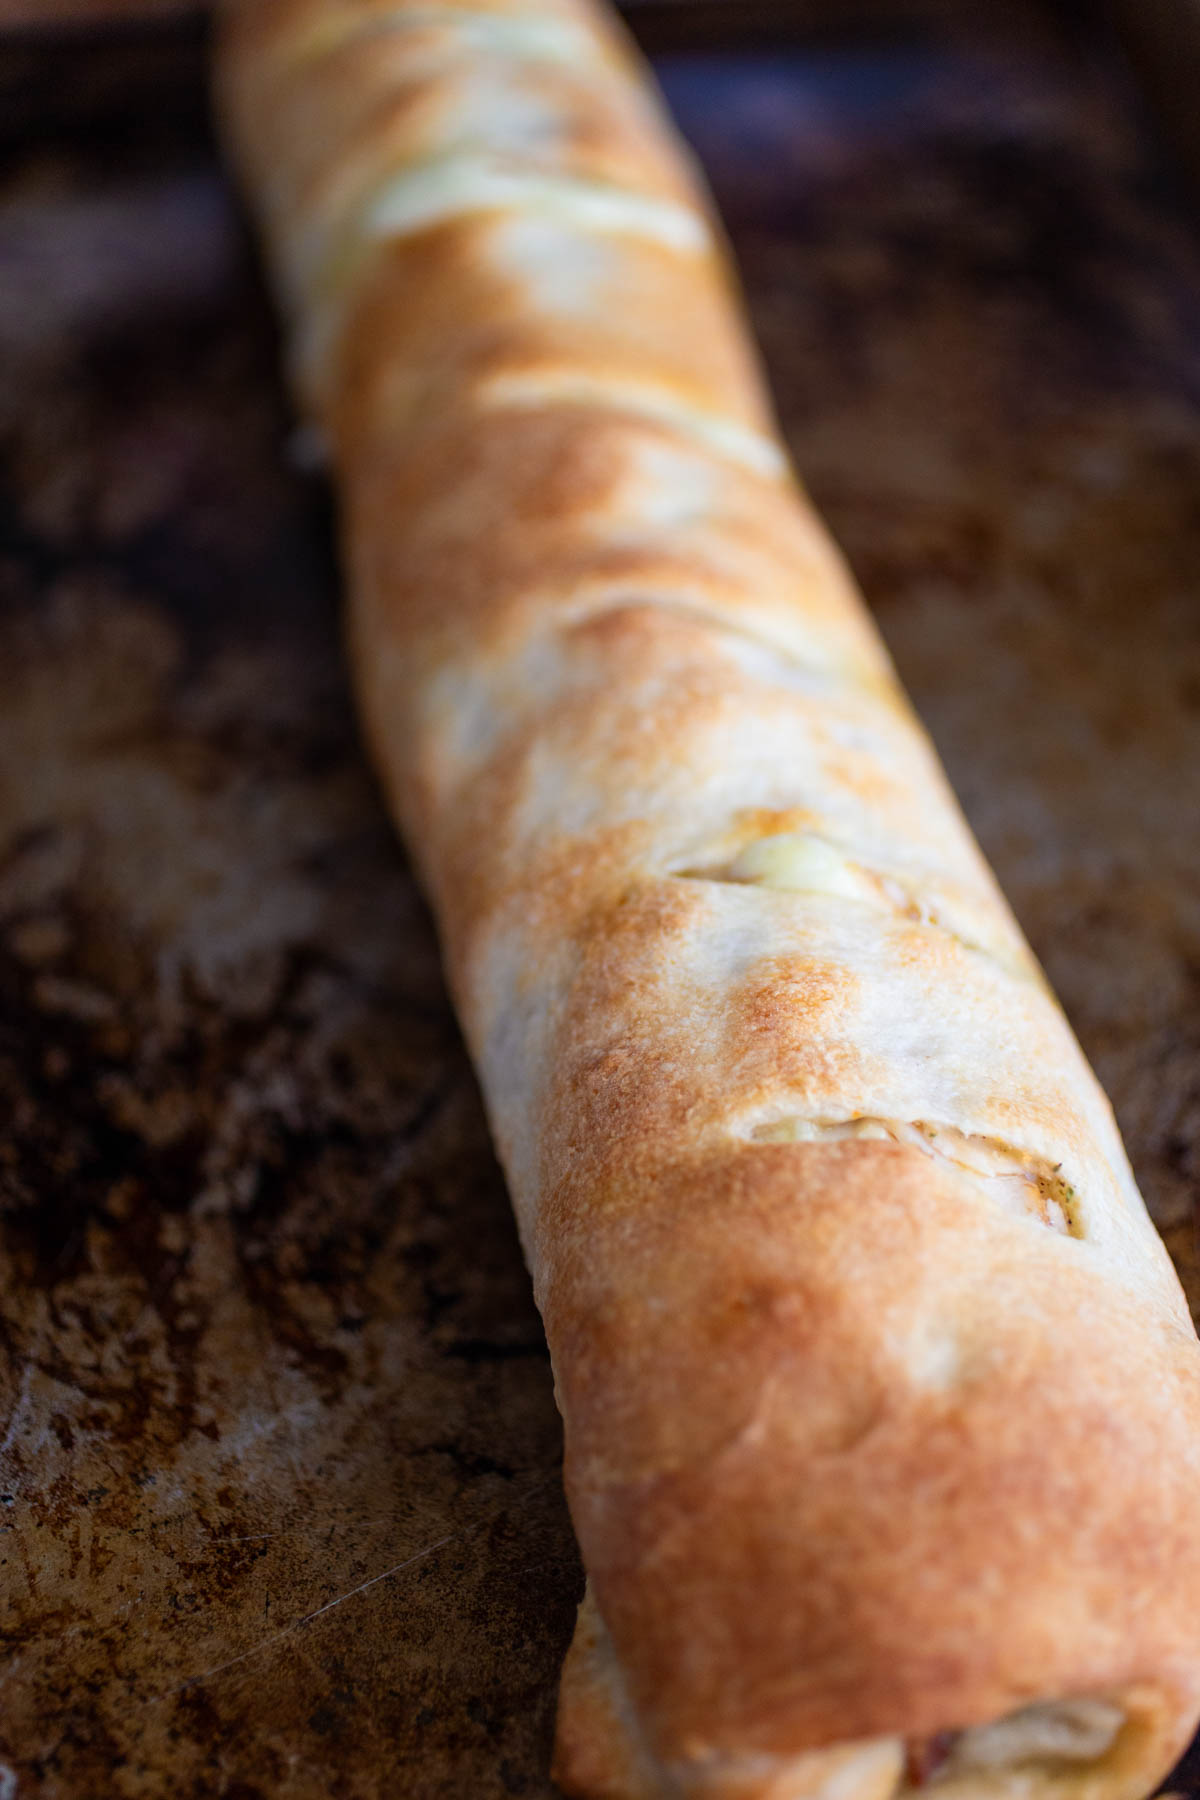 The rolled dough has been baked and is now a golden brown.